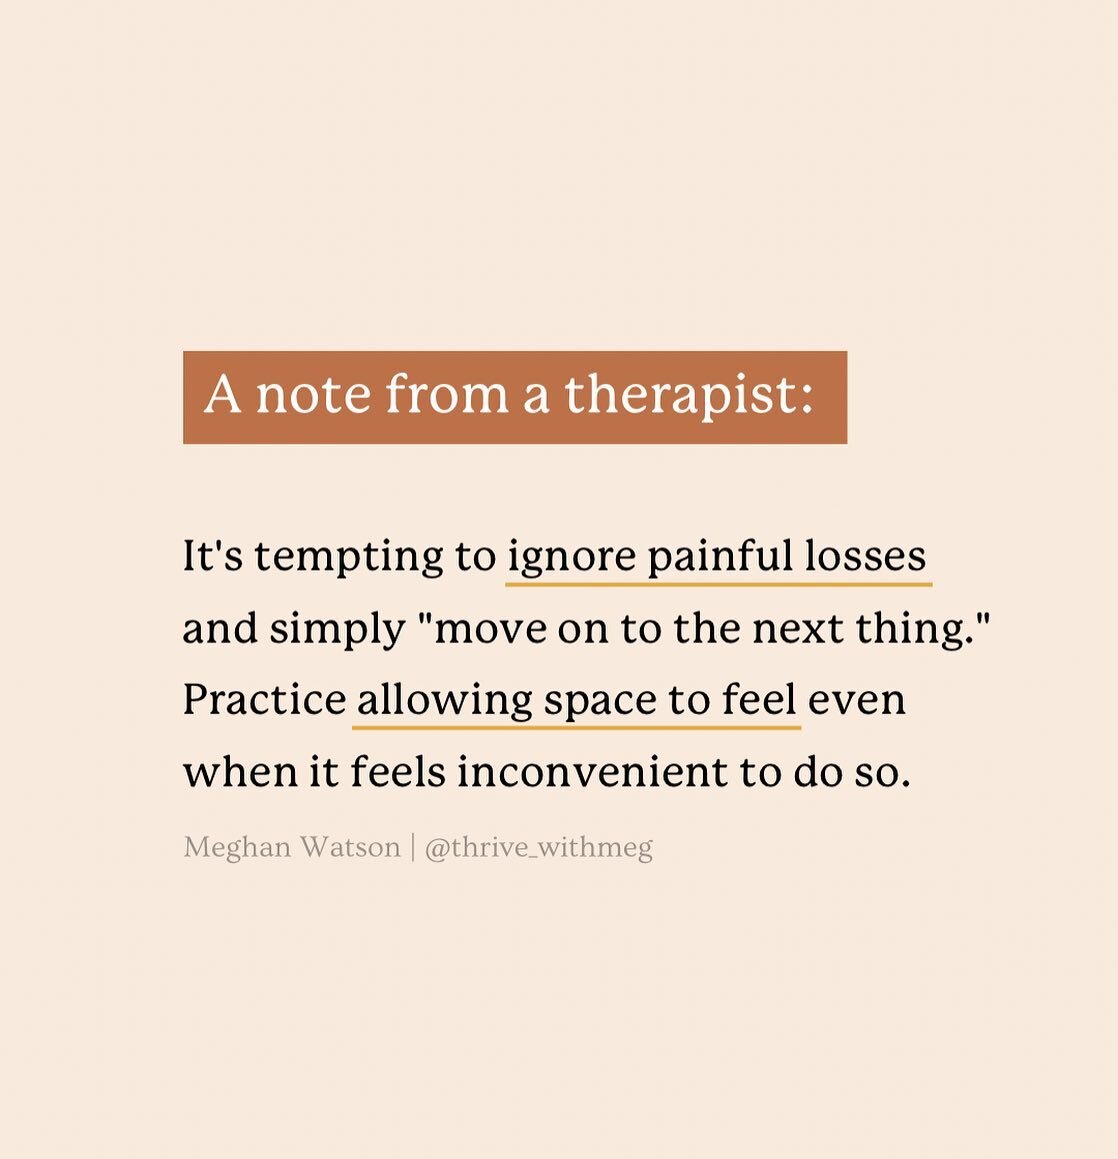 Allowing space to feel can involve:

- Going for a walk to process.
- Breathing into discomfort.
- Crying as a release.
- Journalling what&rsquo;s on your mind.
- Talking to a therapist or friend.
- Stretching for somatic release.
- Naming your emoti